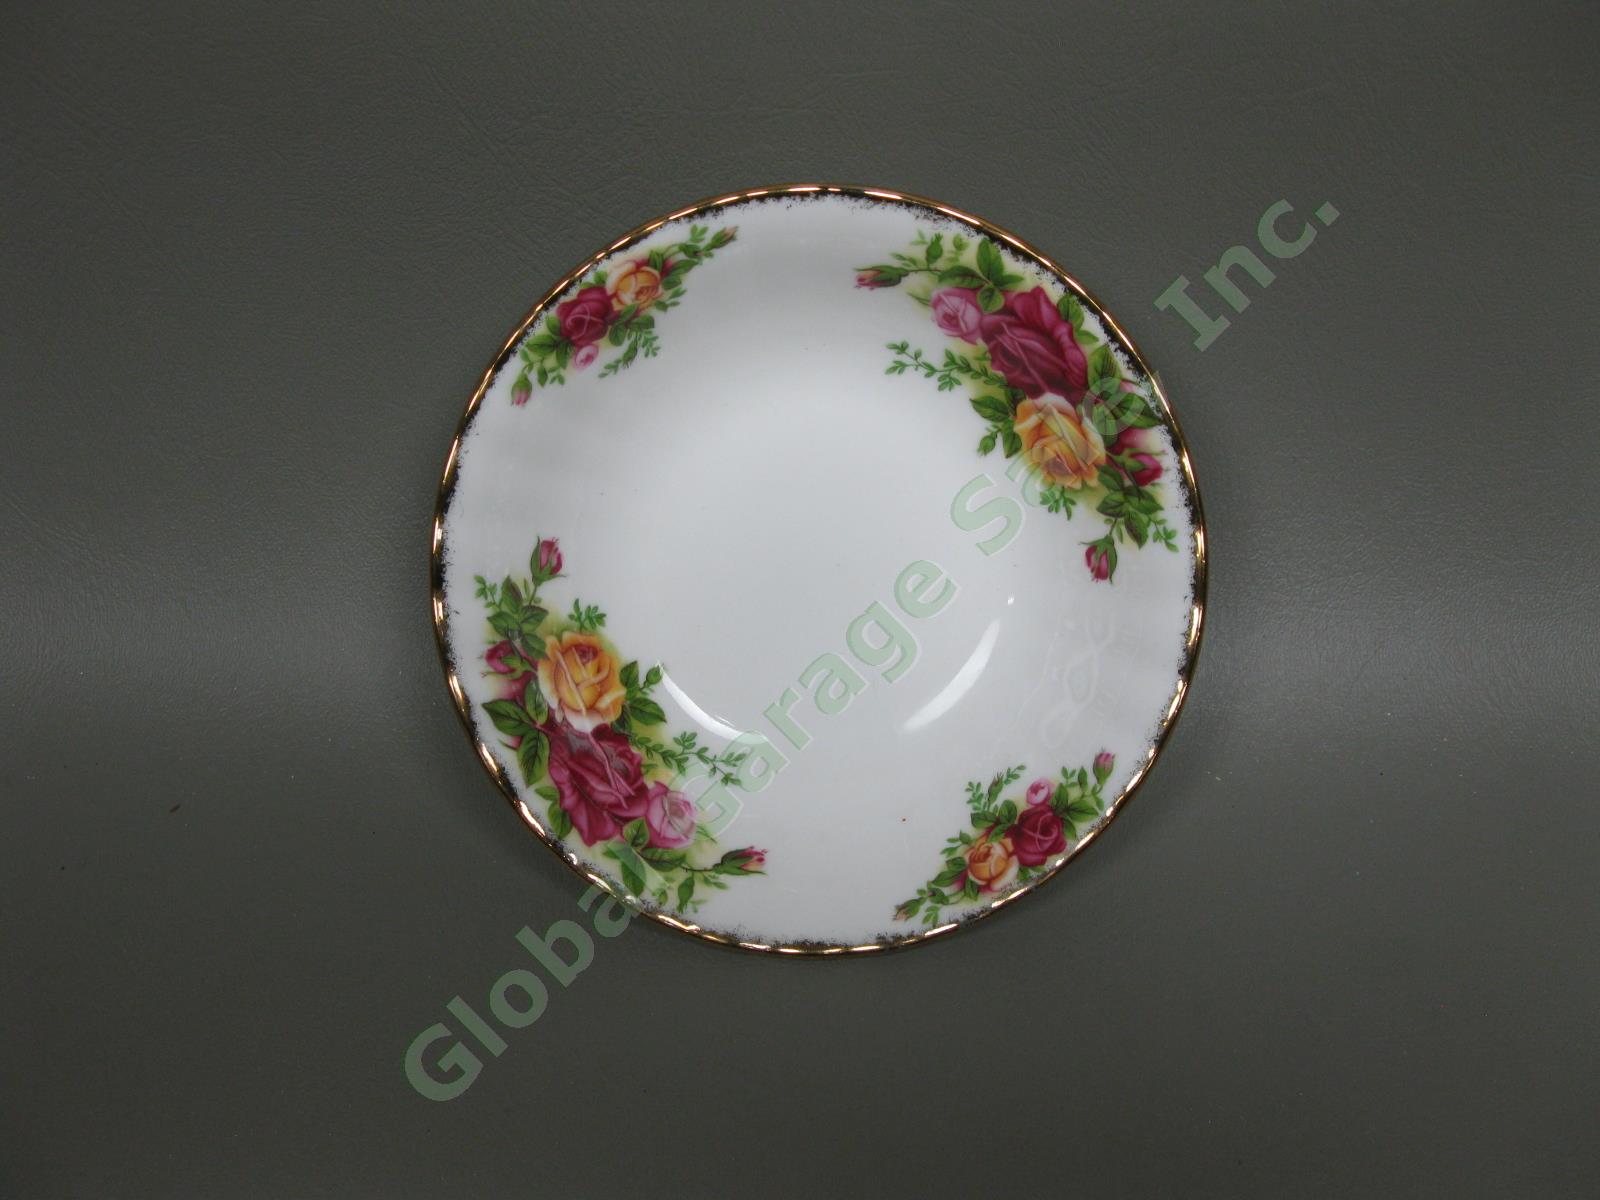 4 Royal Albert Old Country Roses Place Settings Serving Bowl Platter Plate Set 16